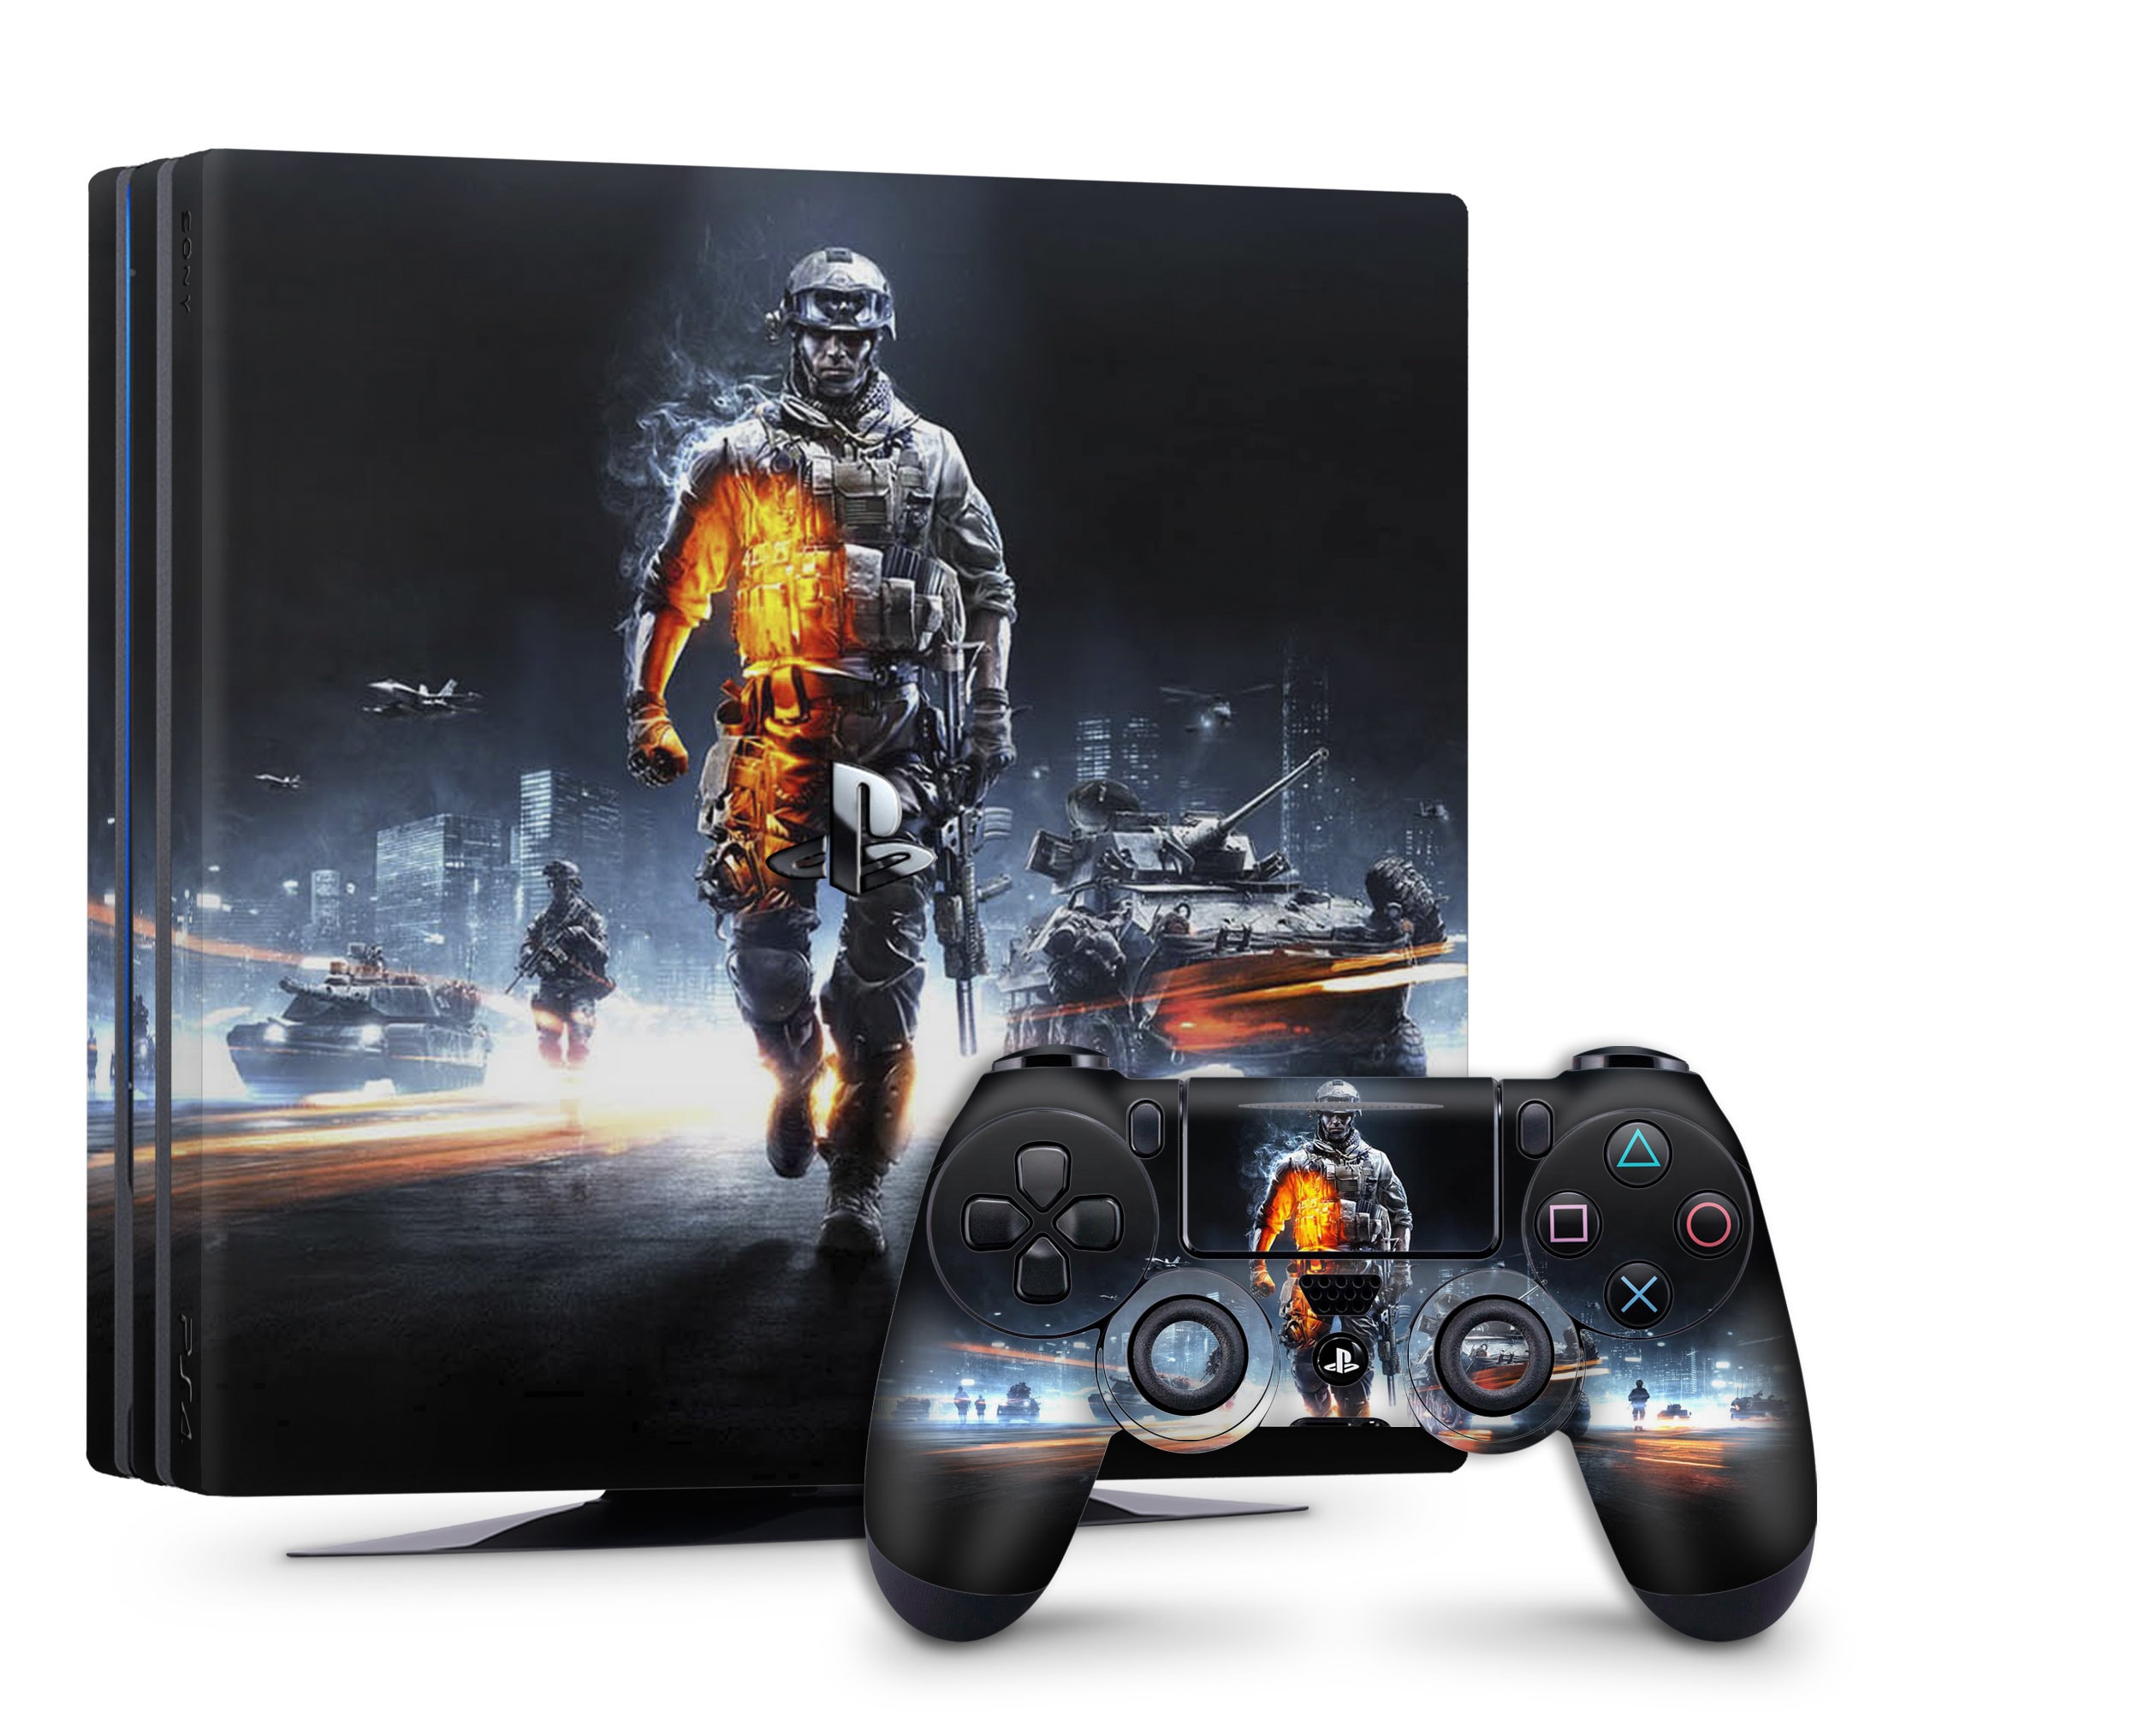 Battlefield 4 - PS4 - Console Game